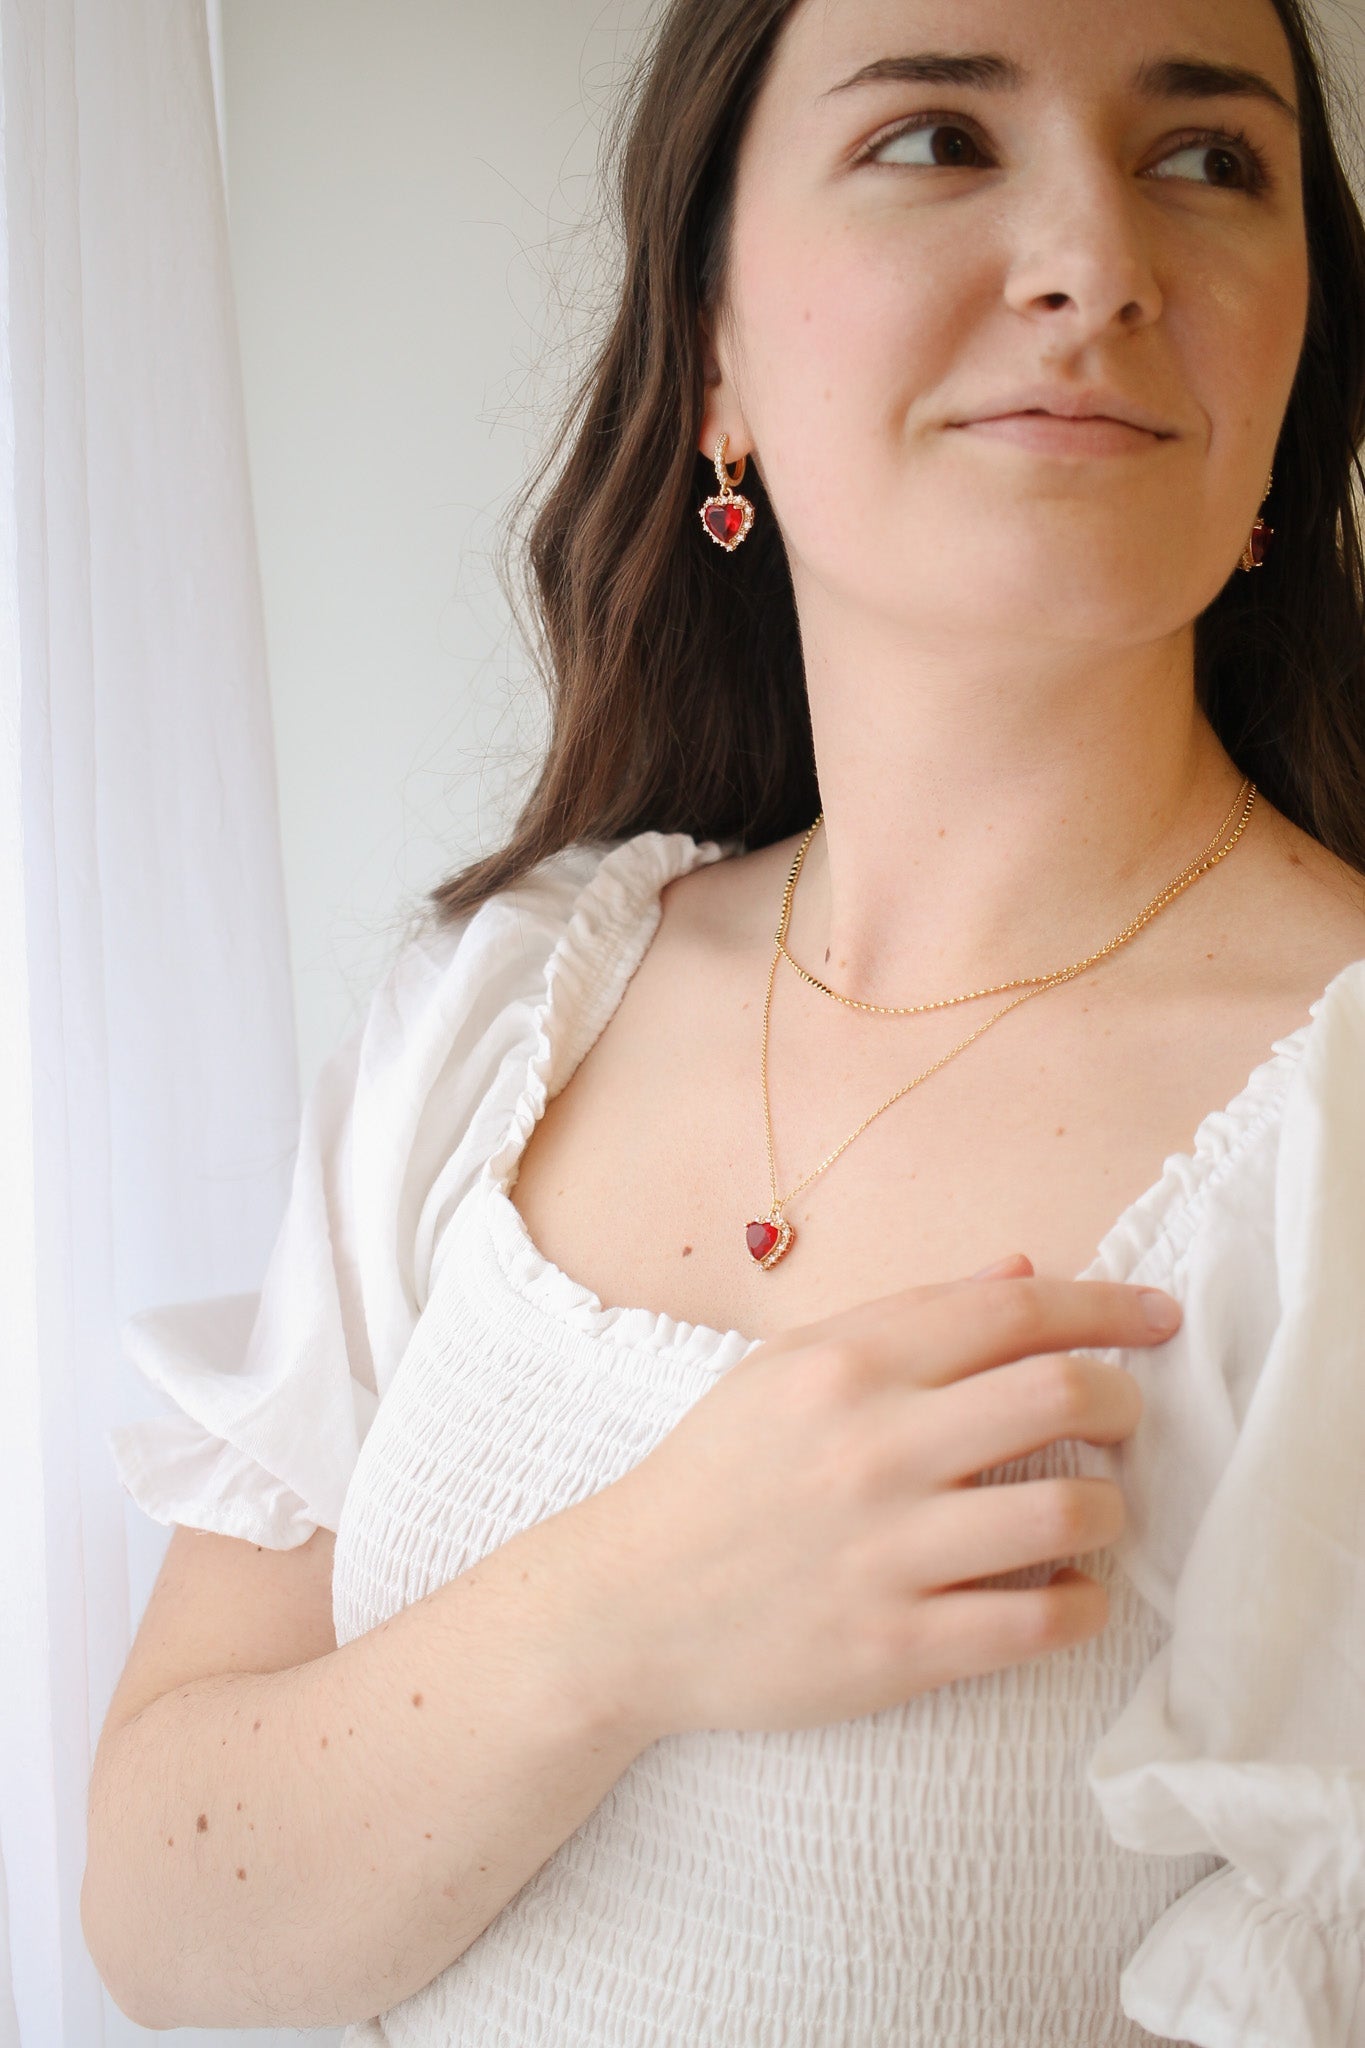 Valentina Necklace in Ruby